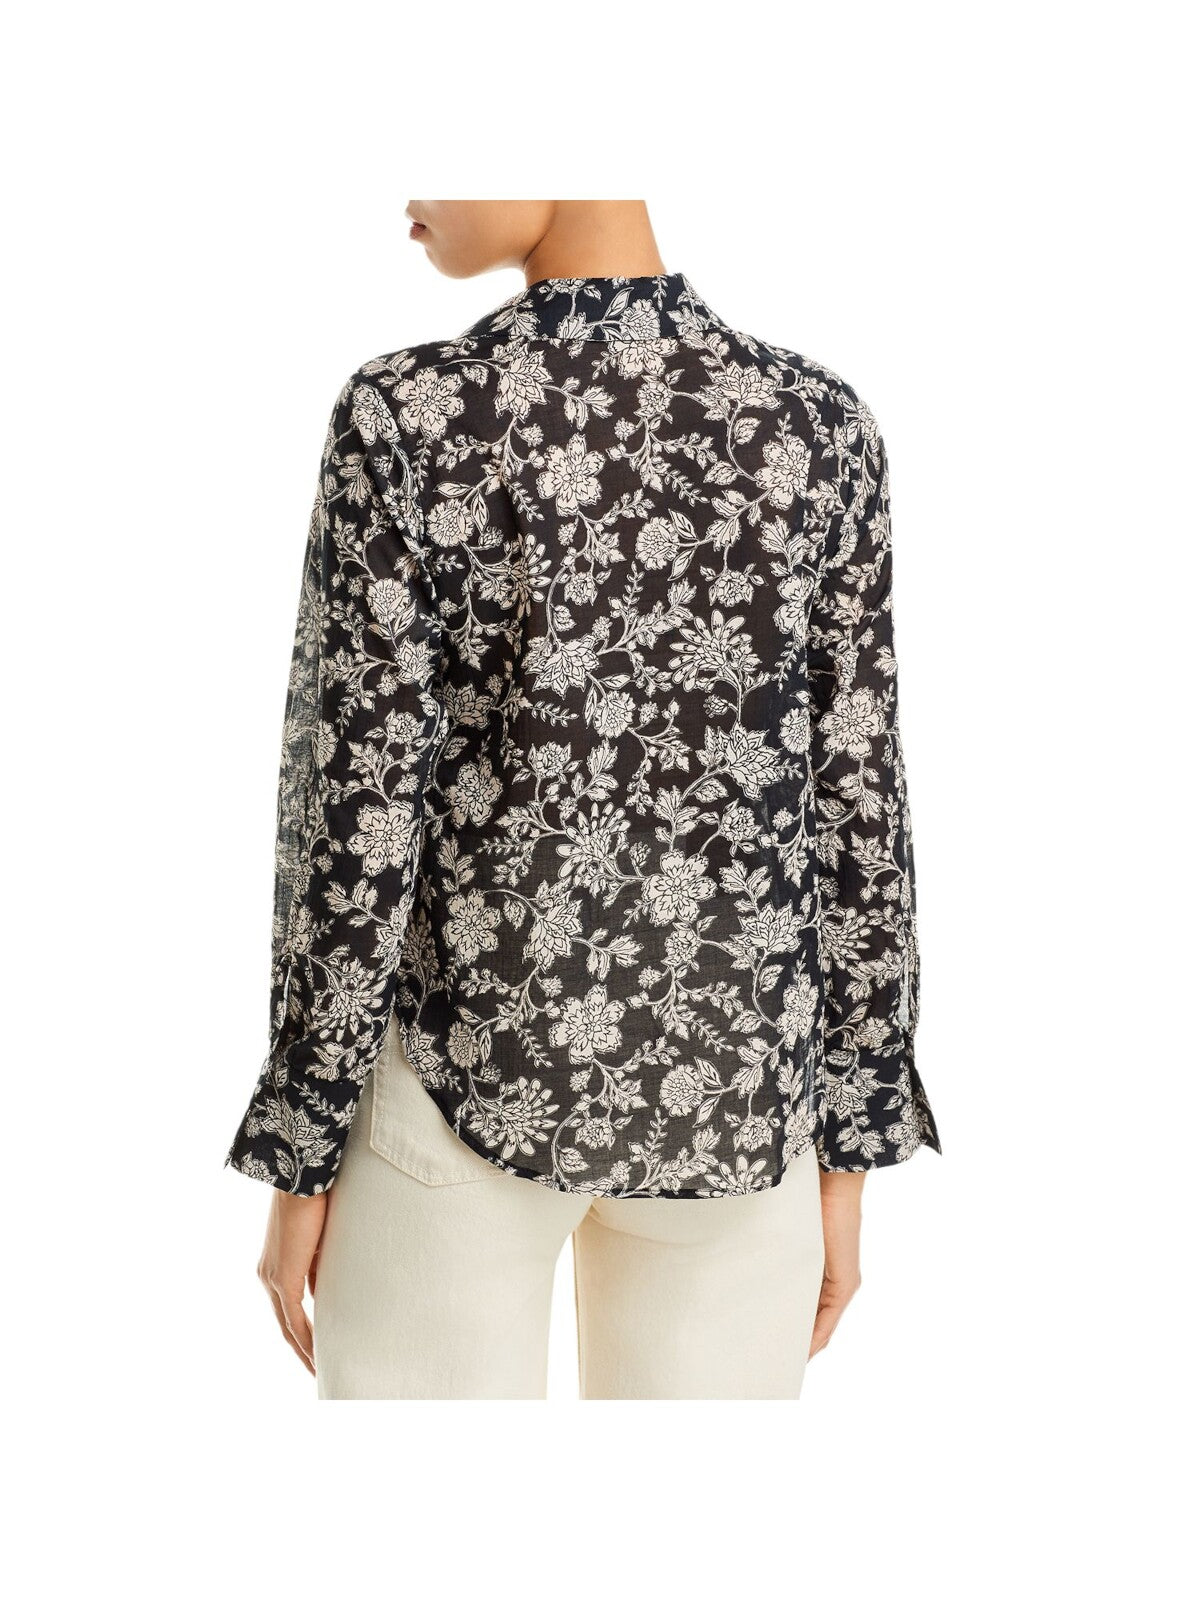 AQUA Womens Black Floral Long Sleeve Collared Blouse S